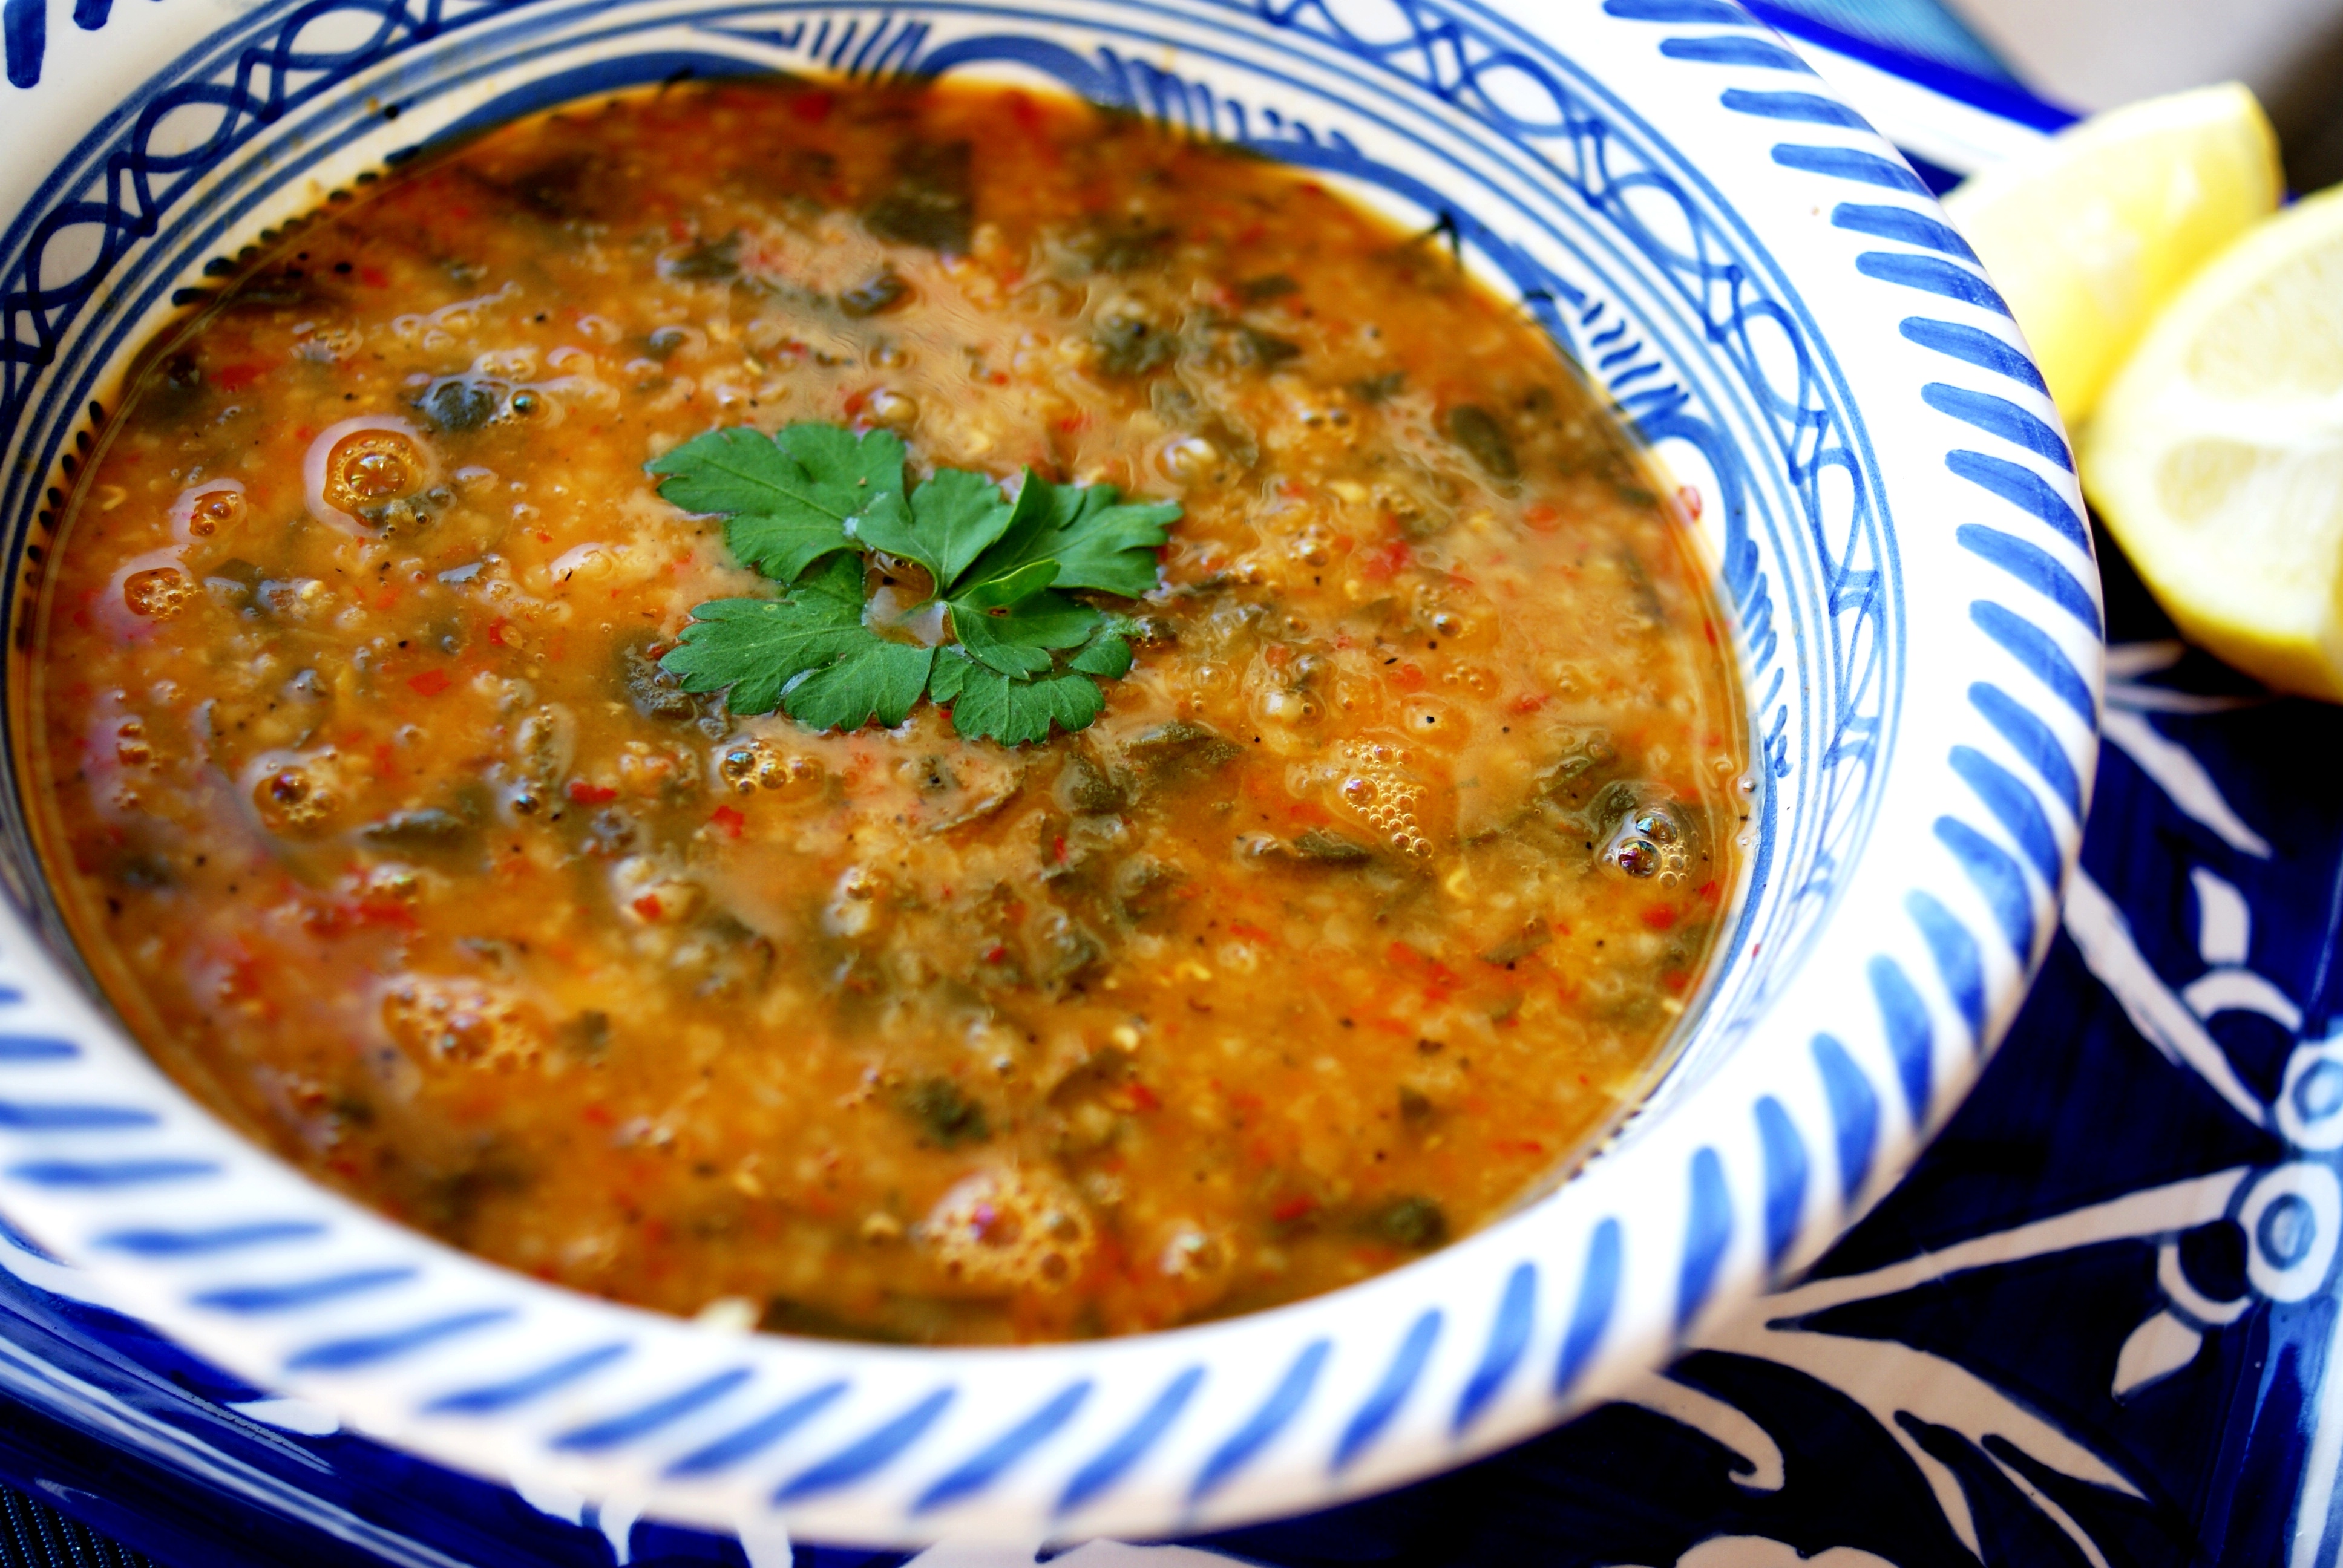 Turkish Lentil Soup with Baby Spinach Recipe on Food52